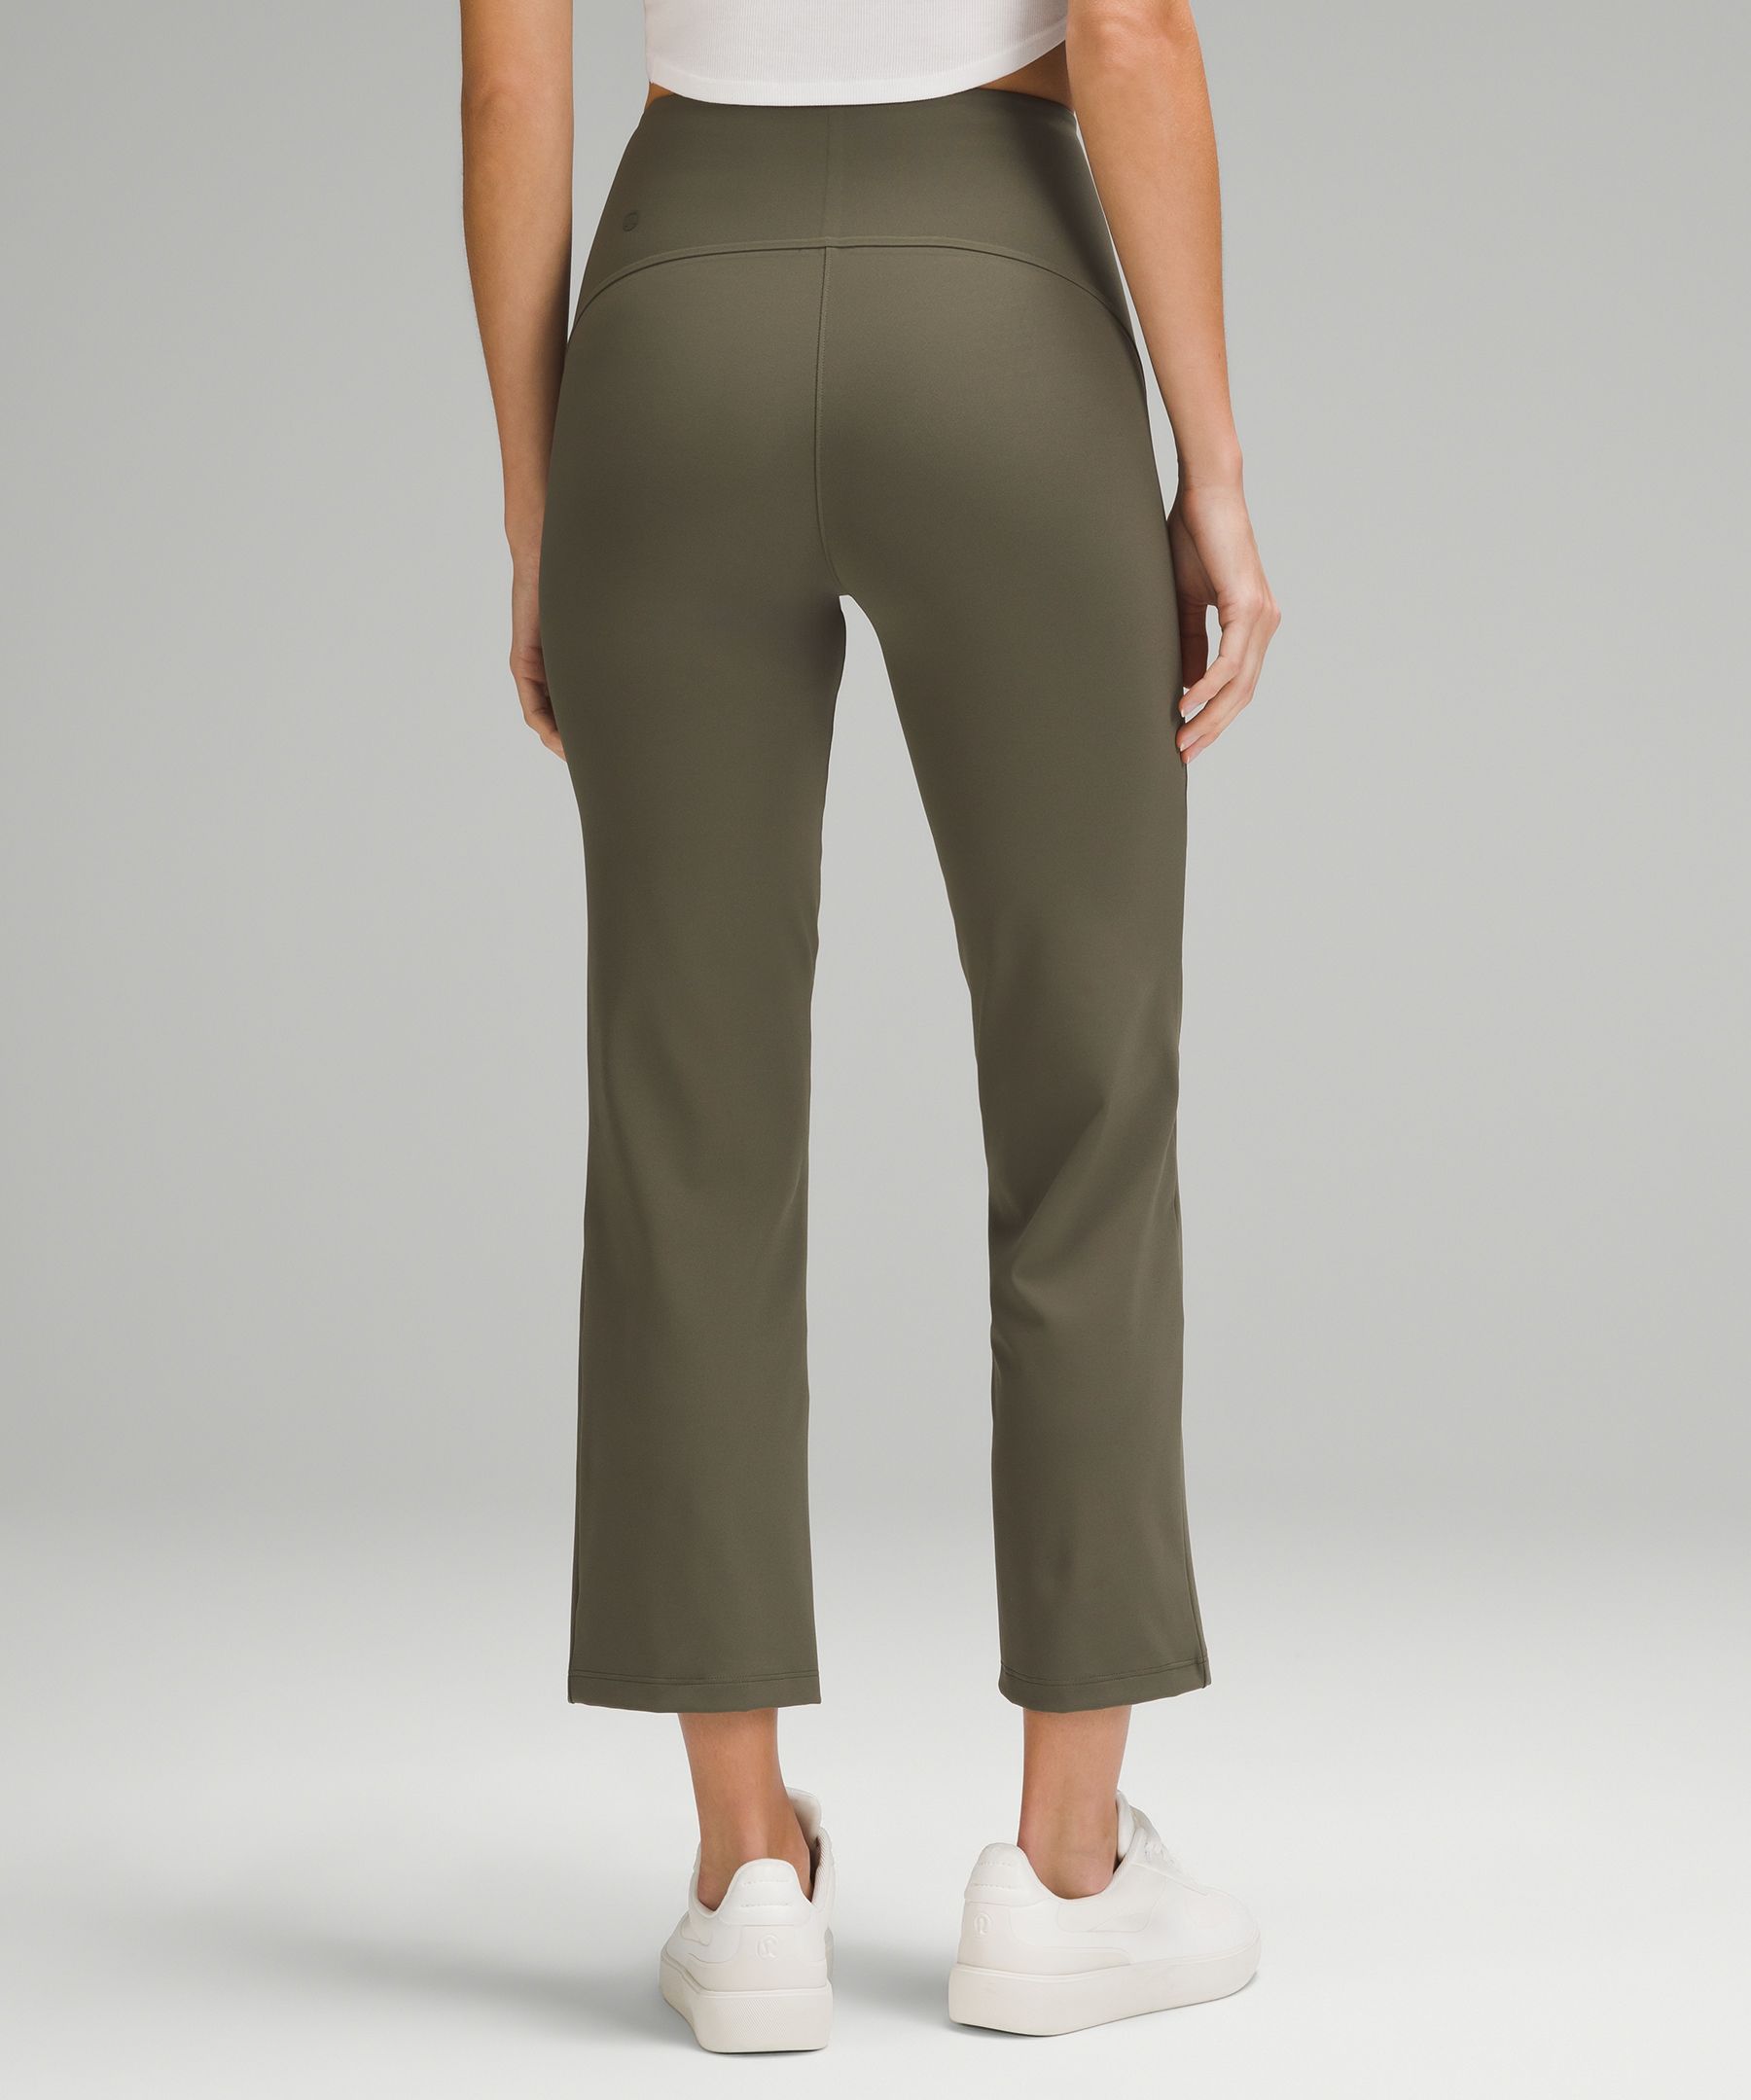 Smooth Fit Pull-On High-Rise Cropped Pant, Women's Capris